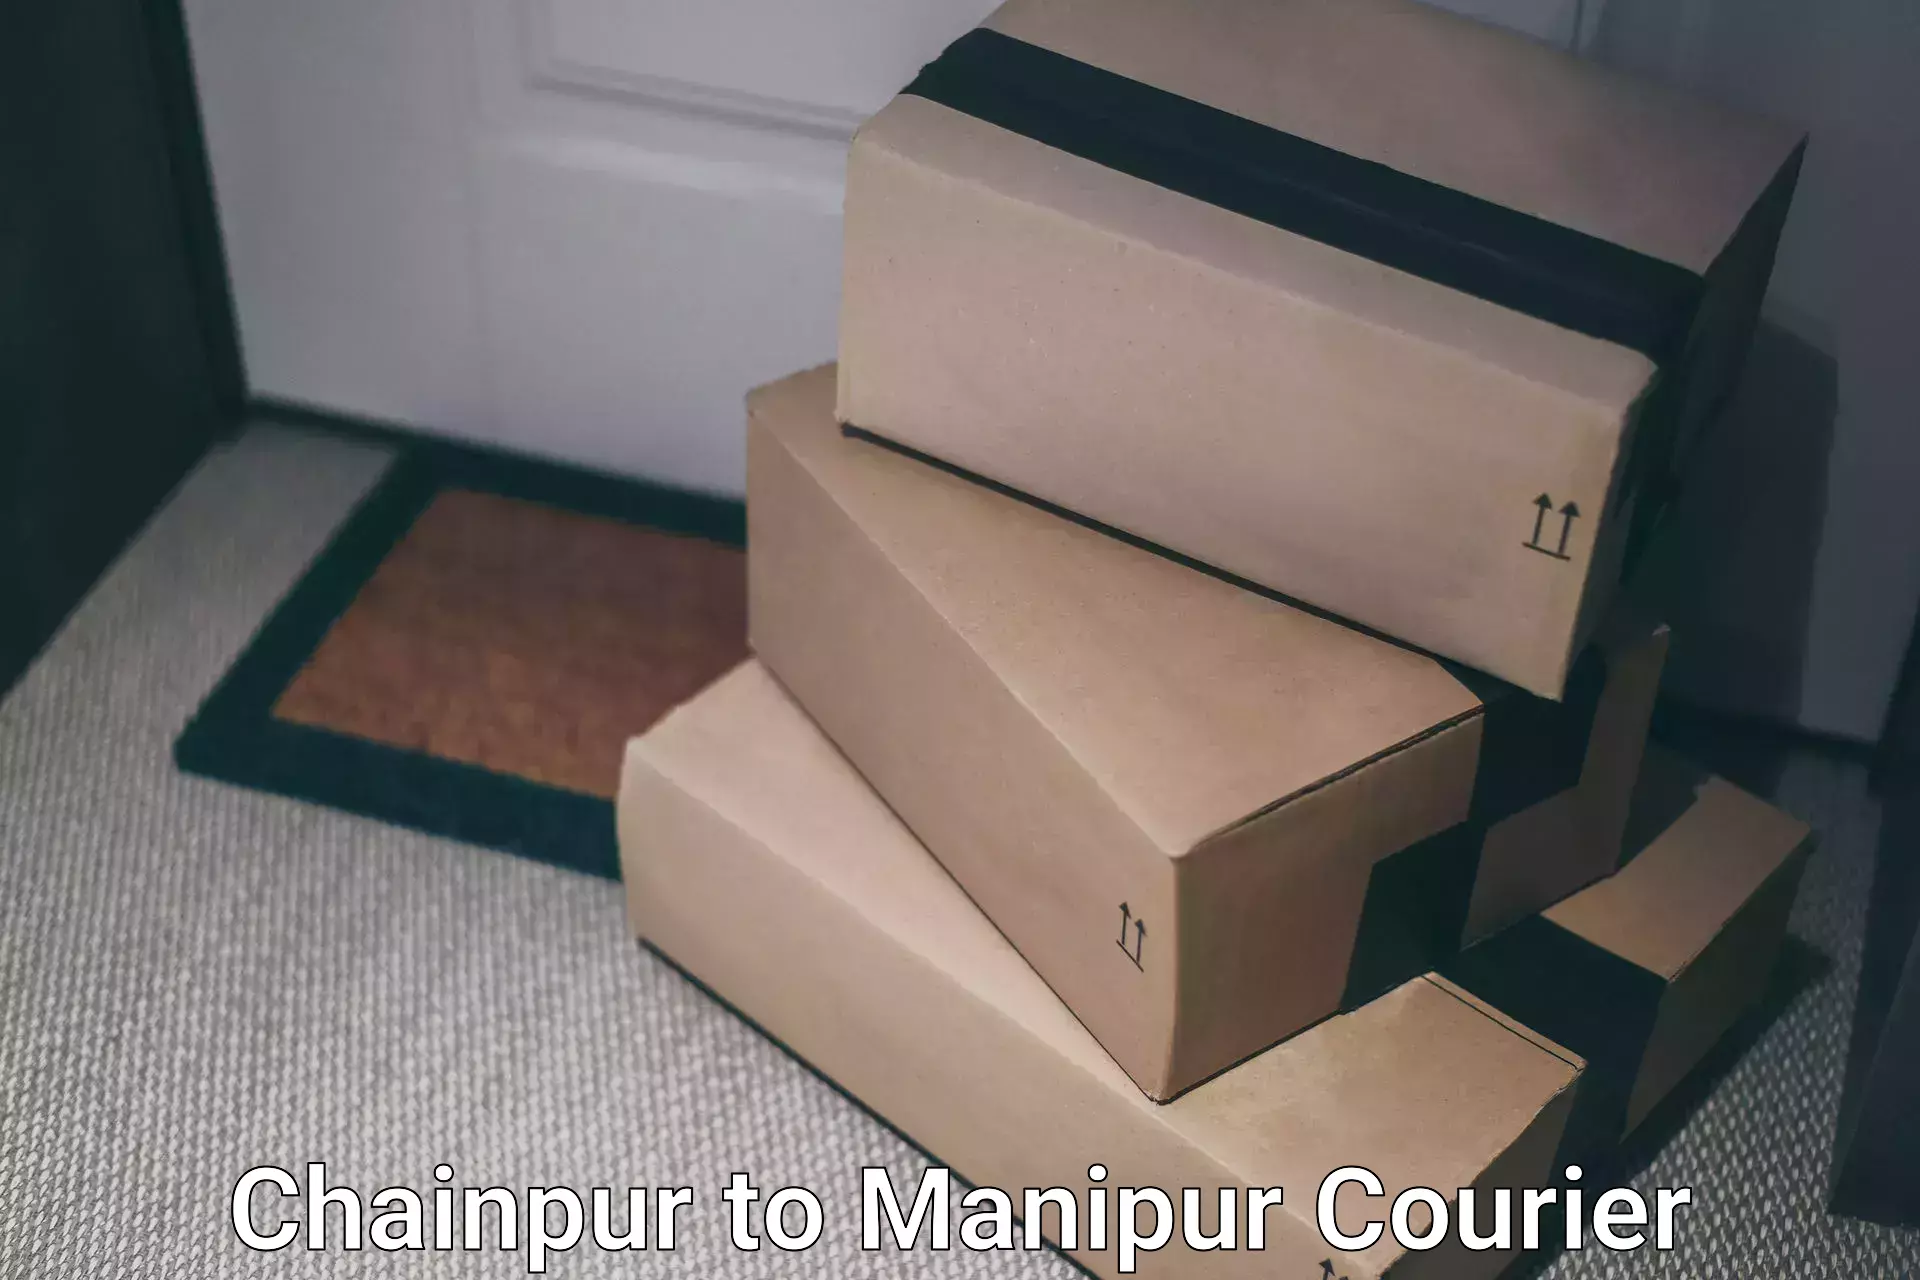 Subscription-based courier Chainpur to Ukhrul